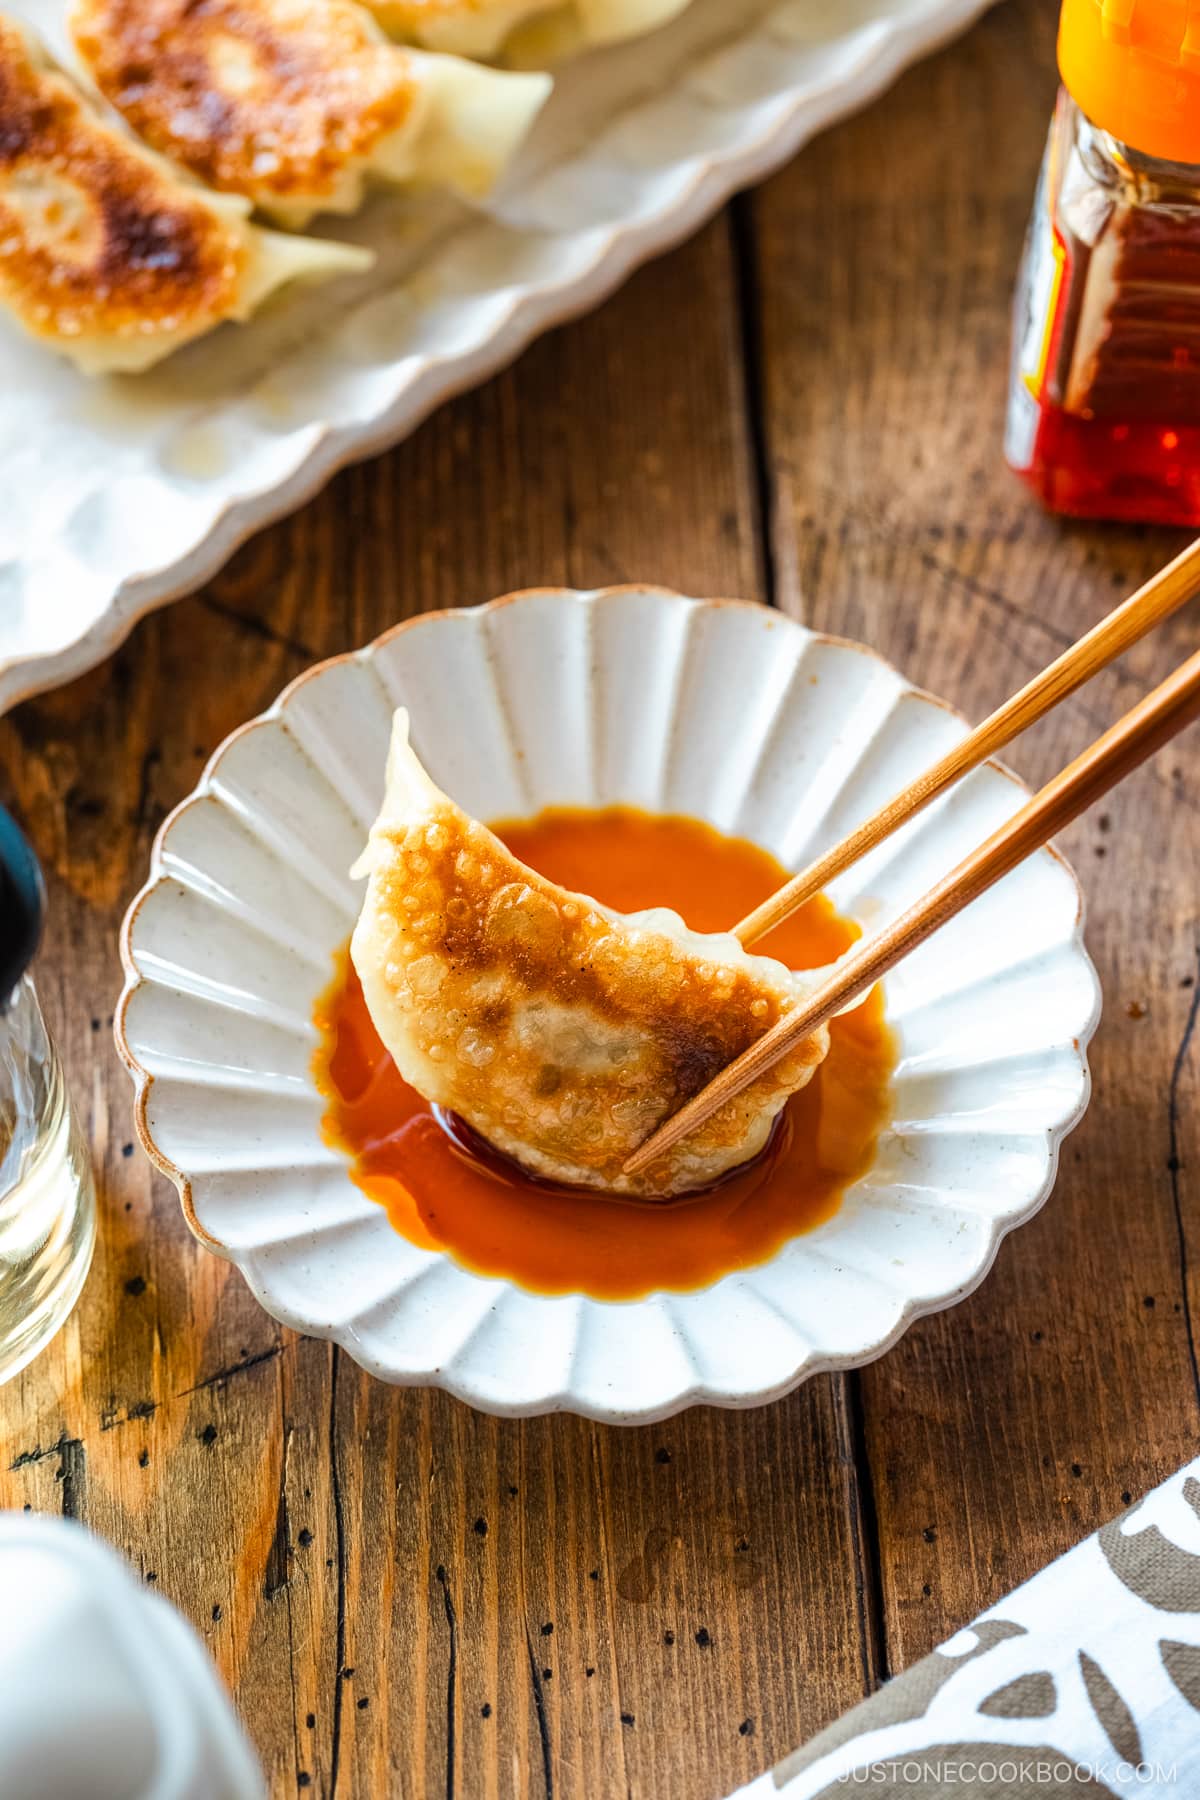 Gyoza in dipping sauce made with soy sauce, vinegar, and Japanese chili oil.